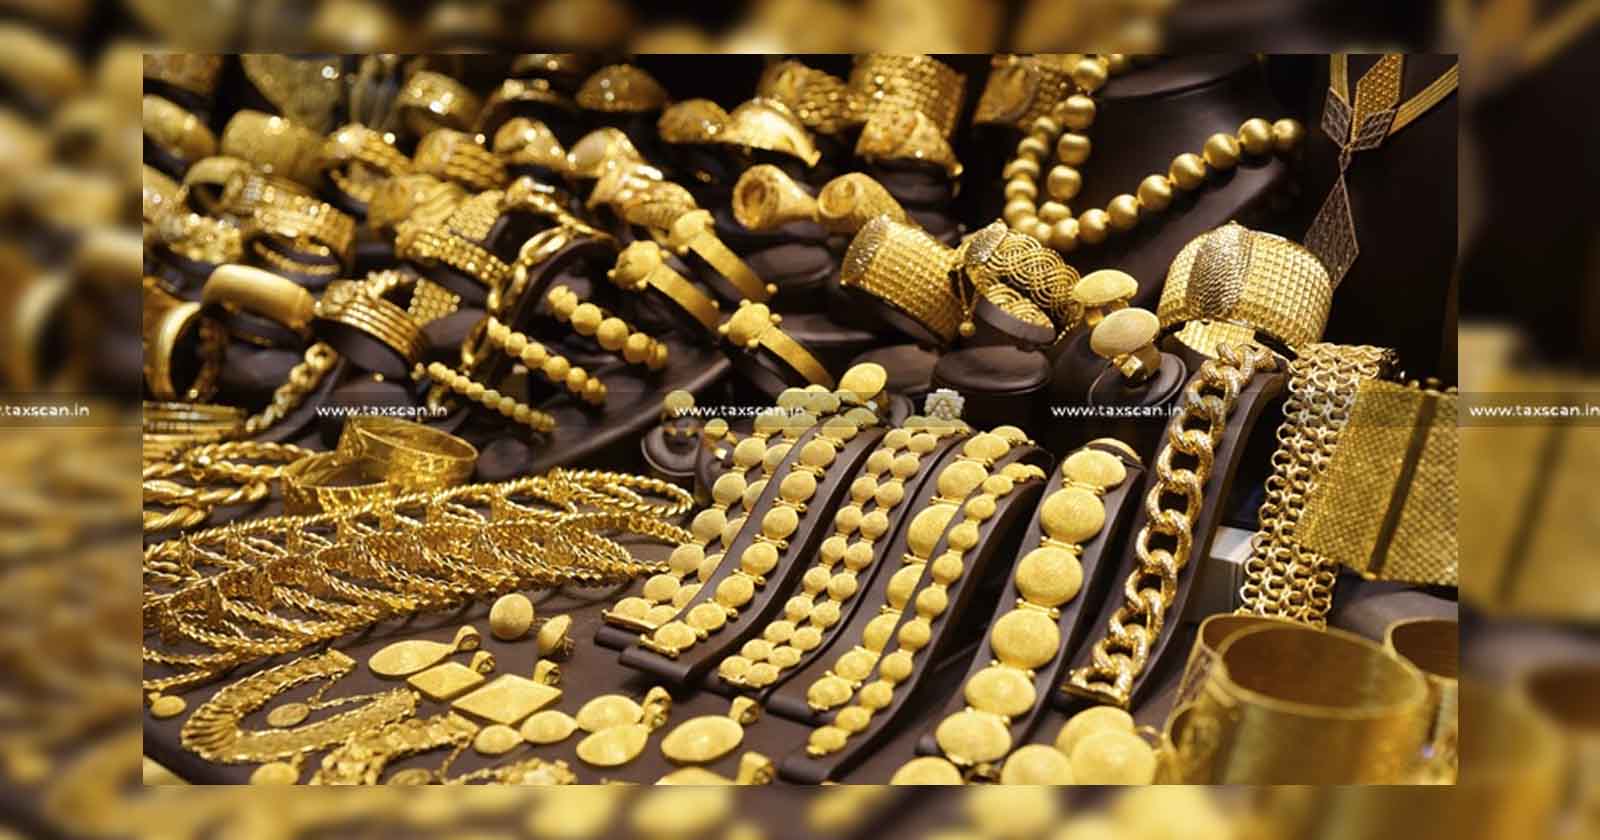 Income Tax - Gold Jewellery - Jewellery - Gold Holders -gold - amount of gold - coins -bars - taxscan